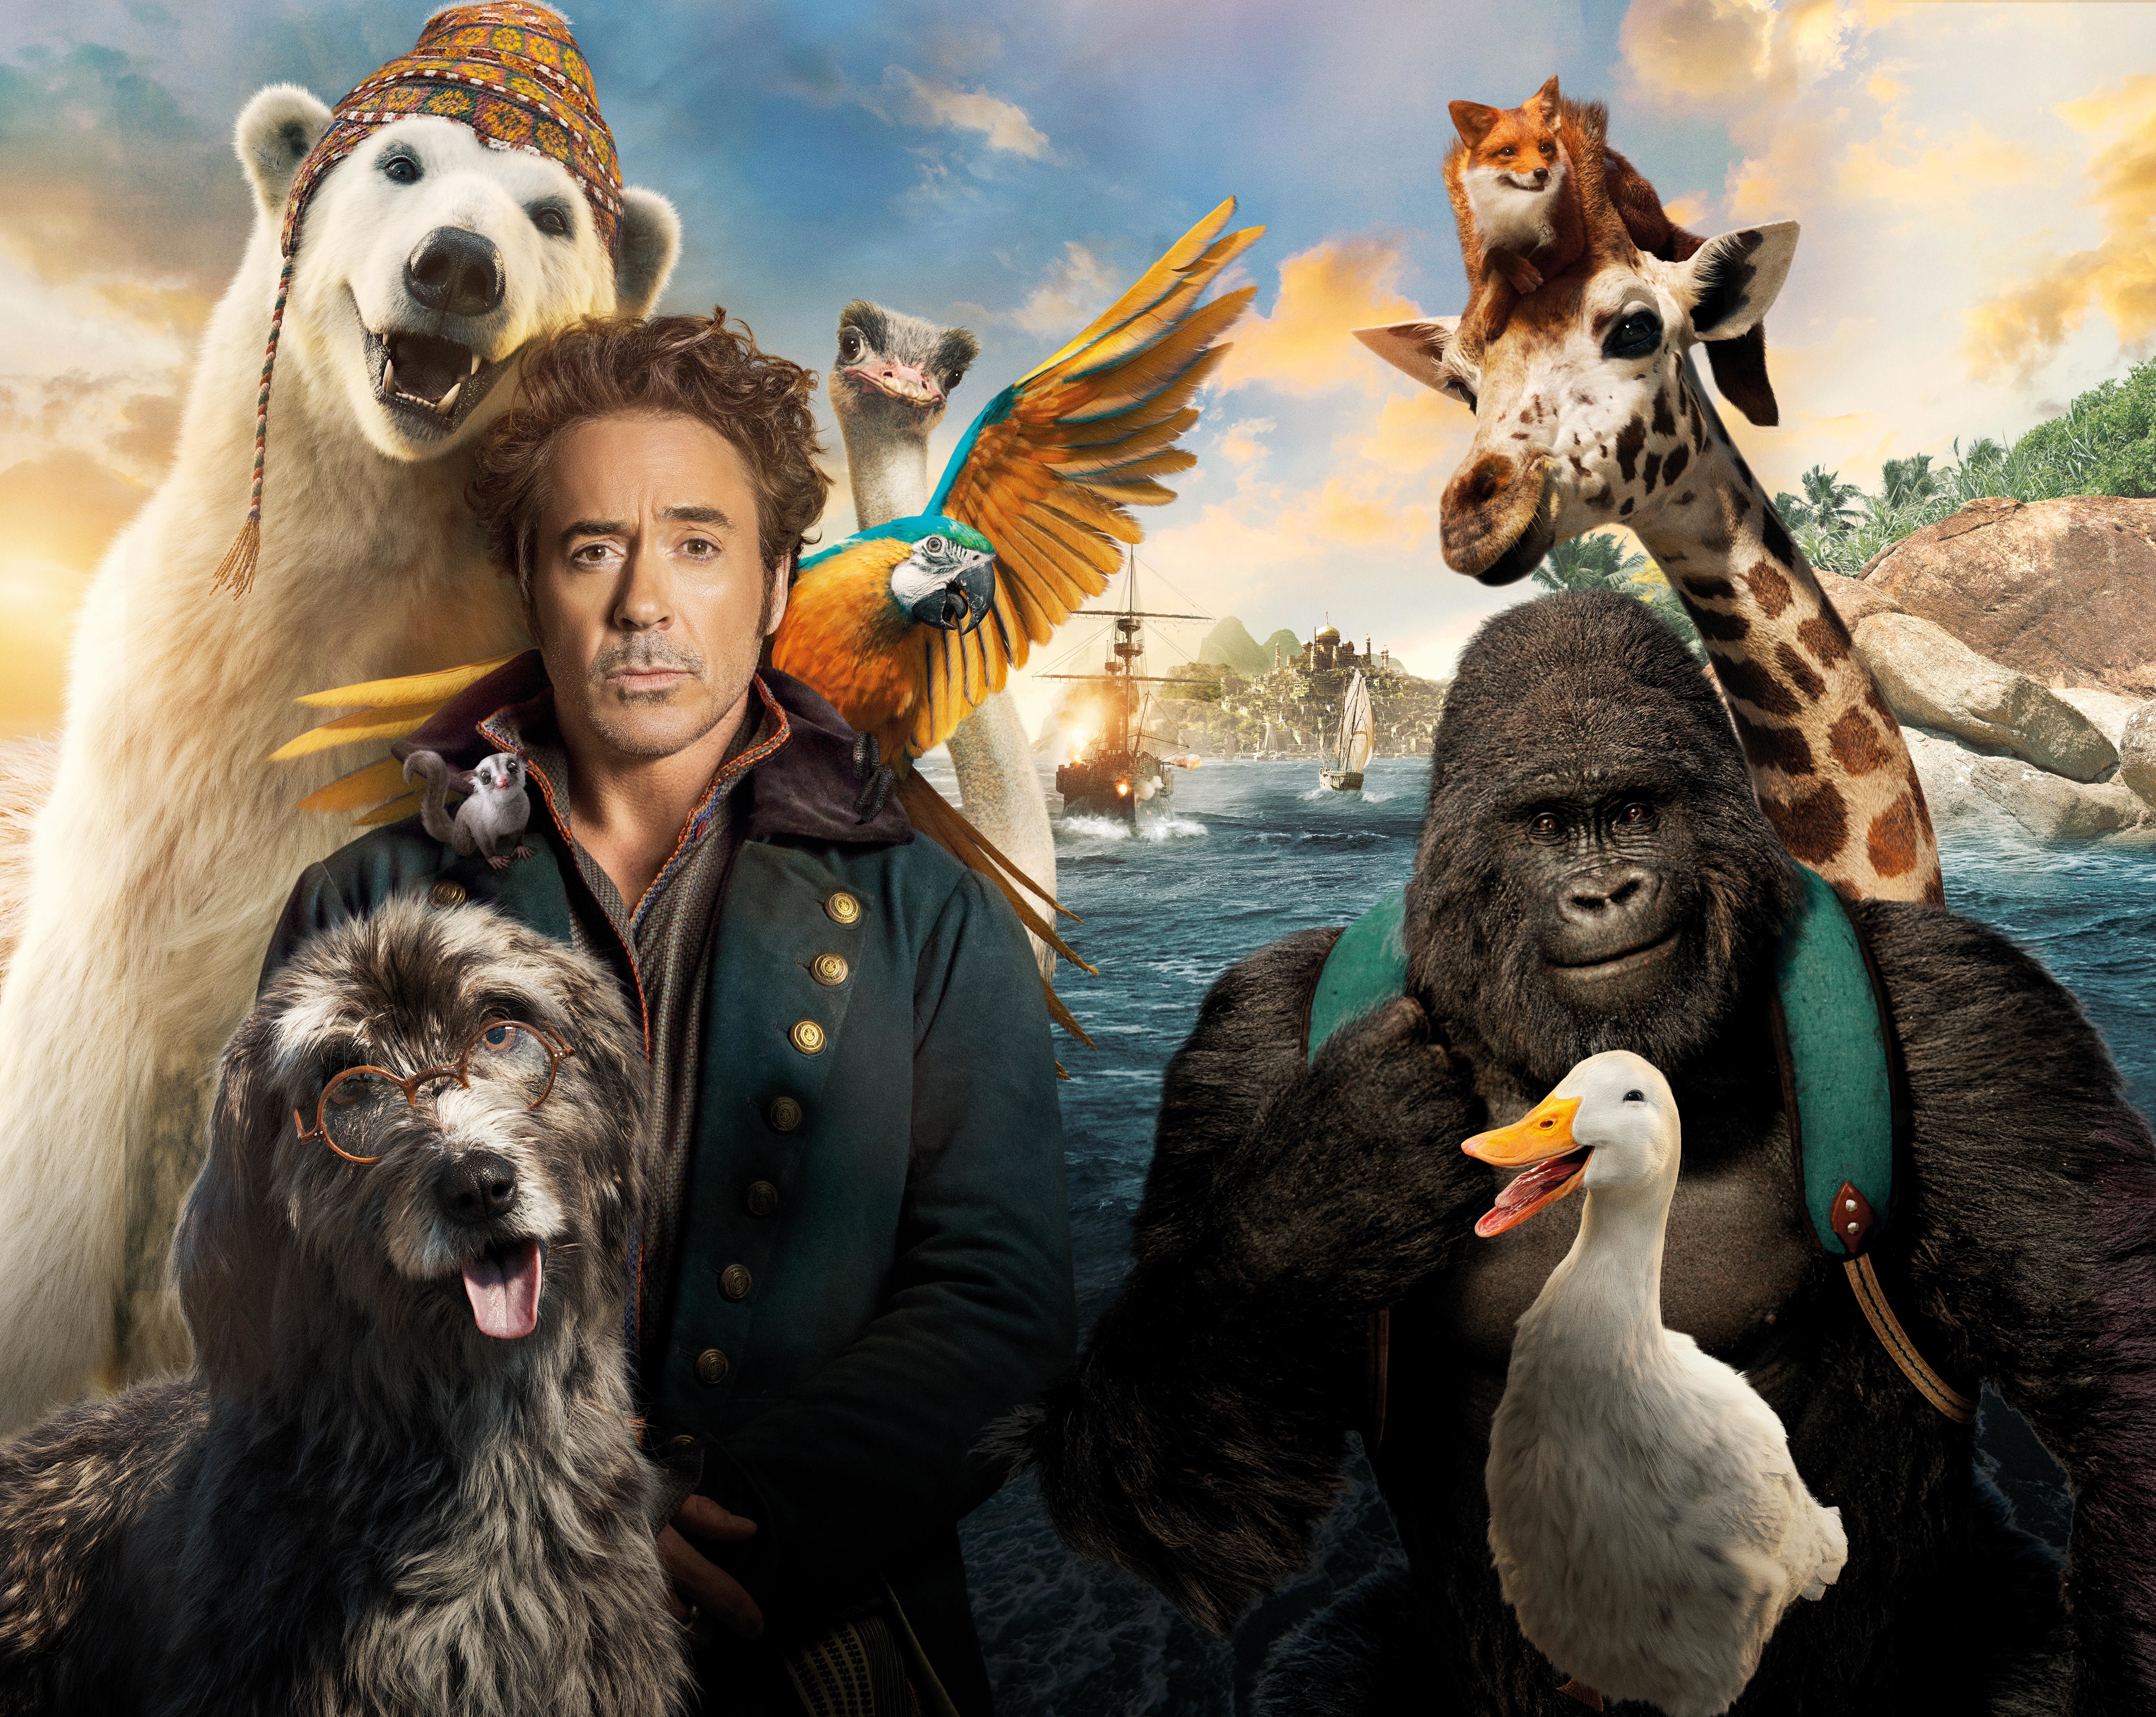 Doctor dolittle full movie free download